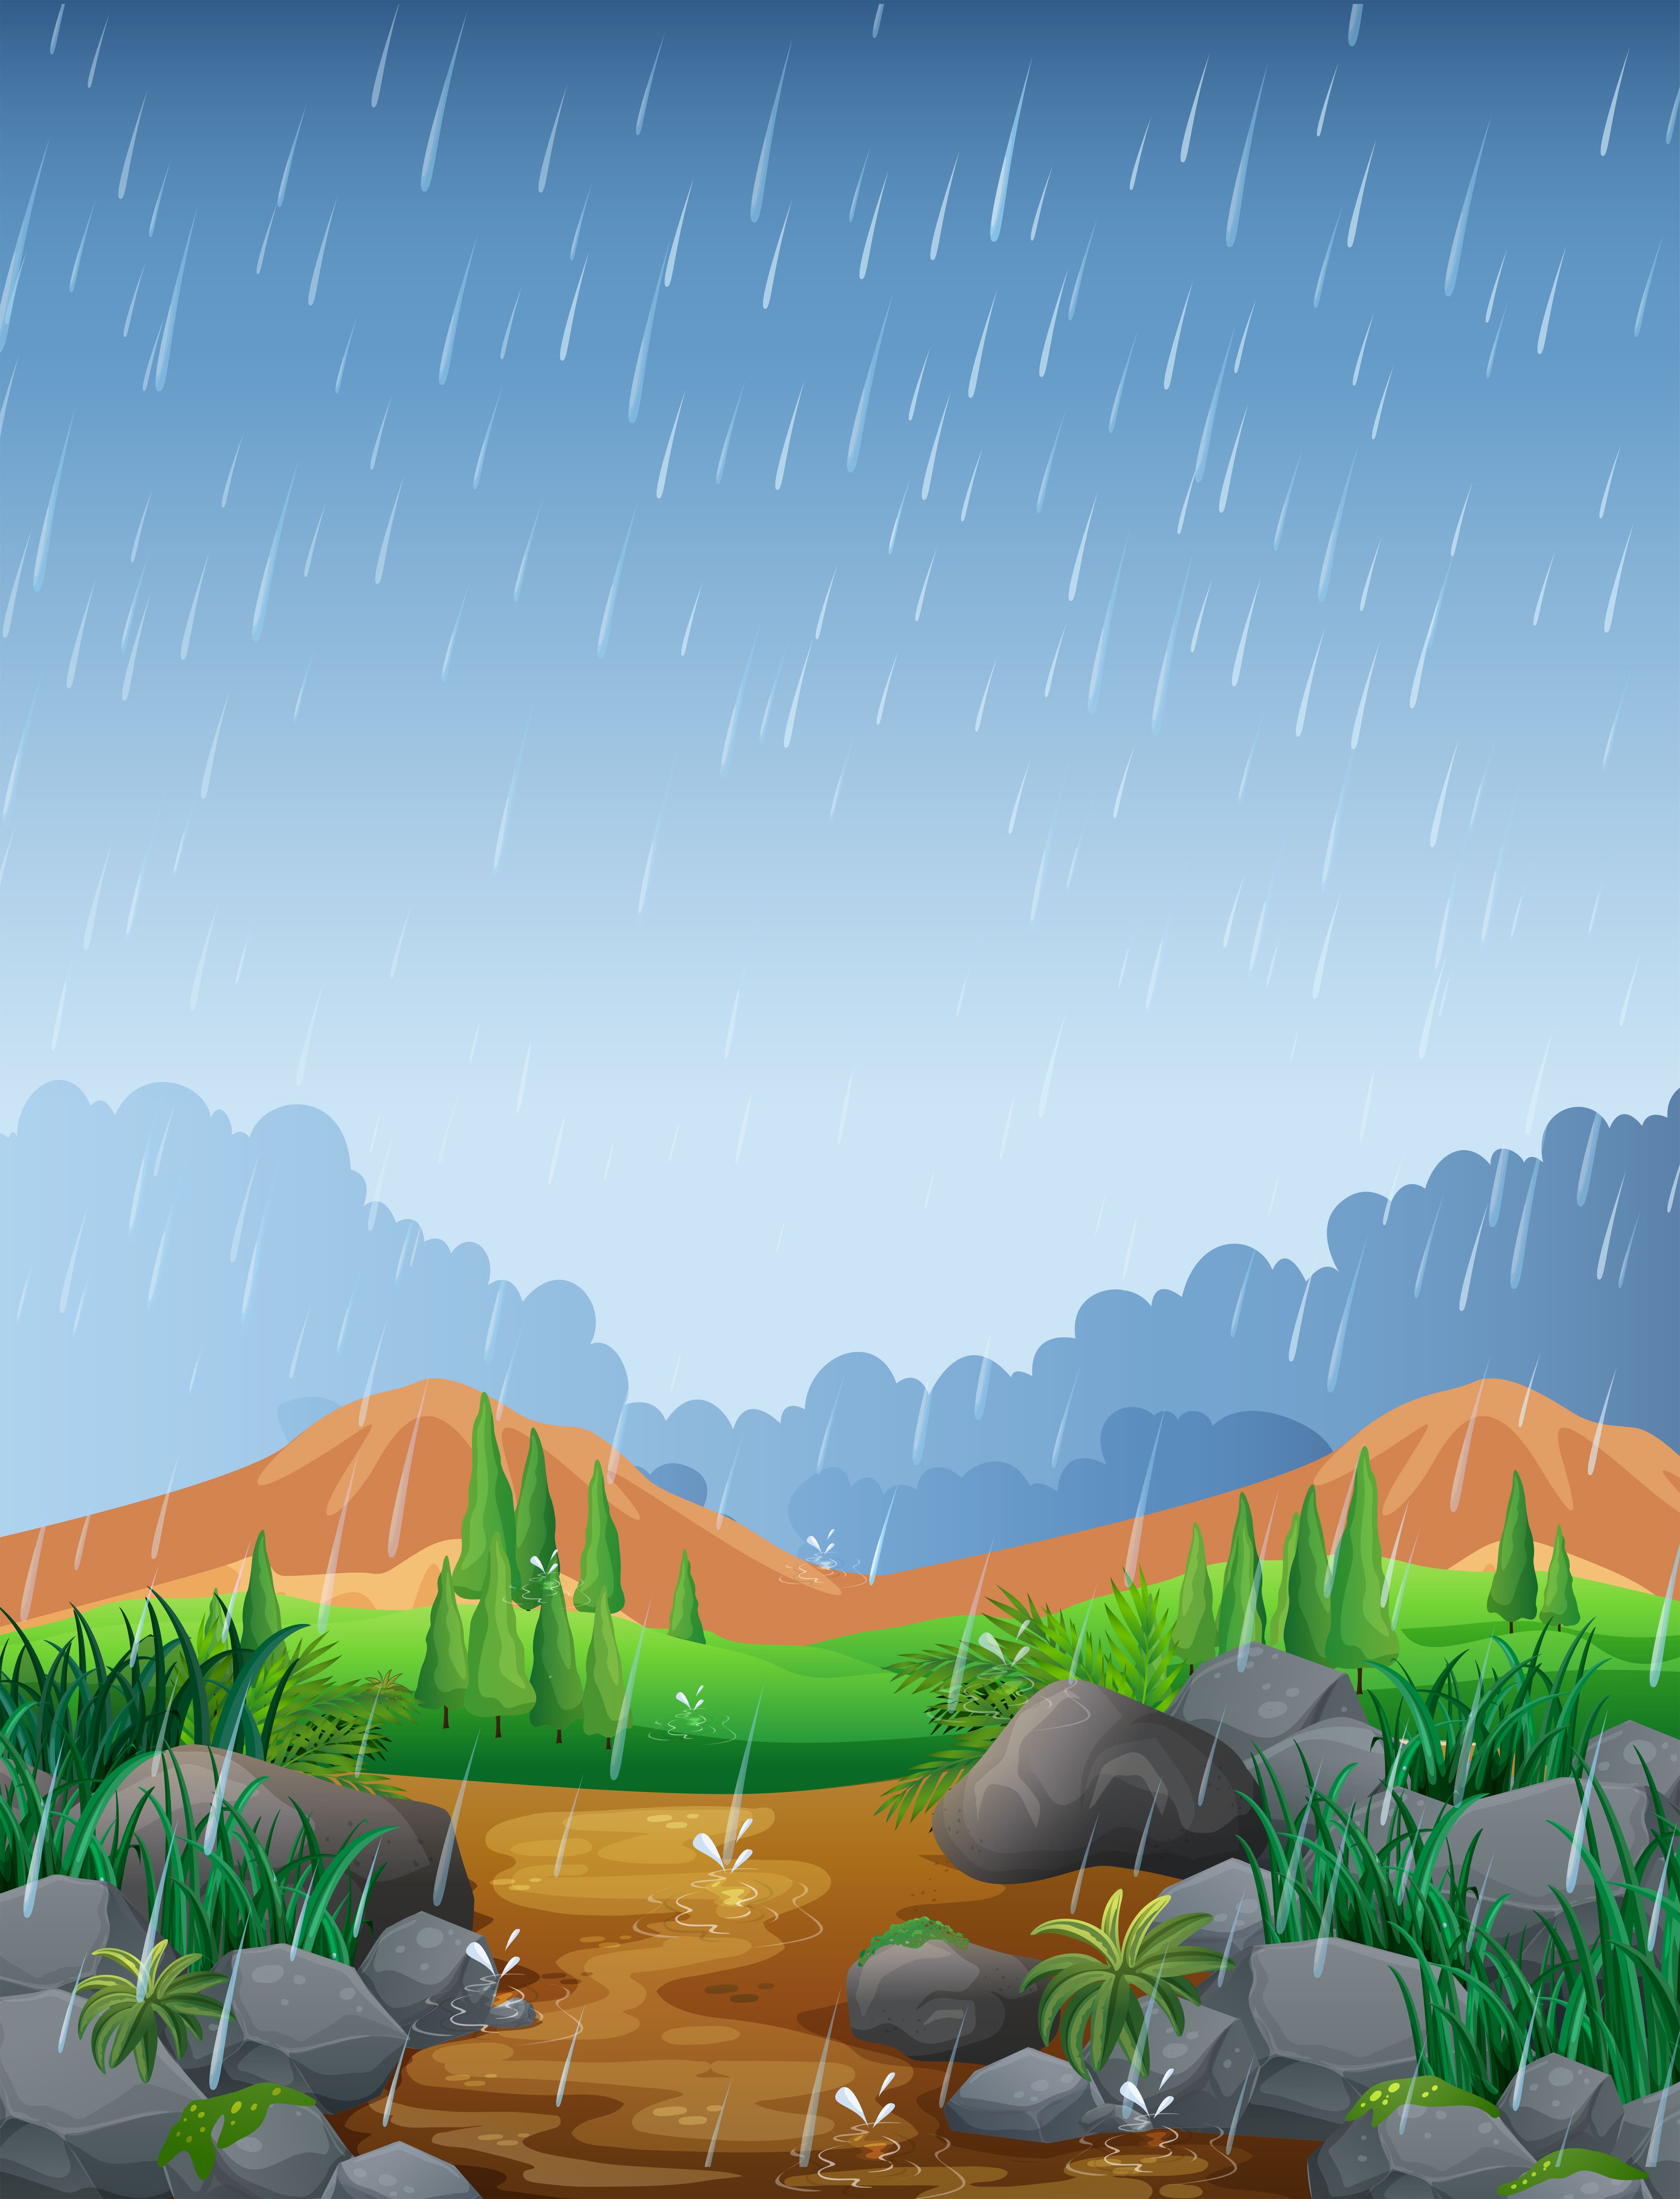 Flood Alert - The Interesting Video Explains How Heavy Rain Can Be Harmful After Heatwave